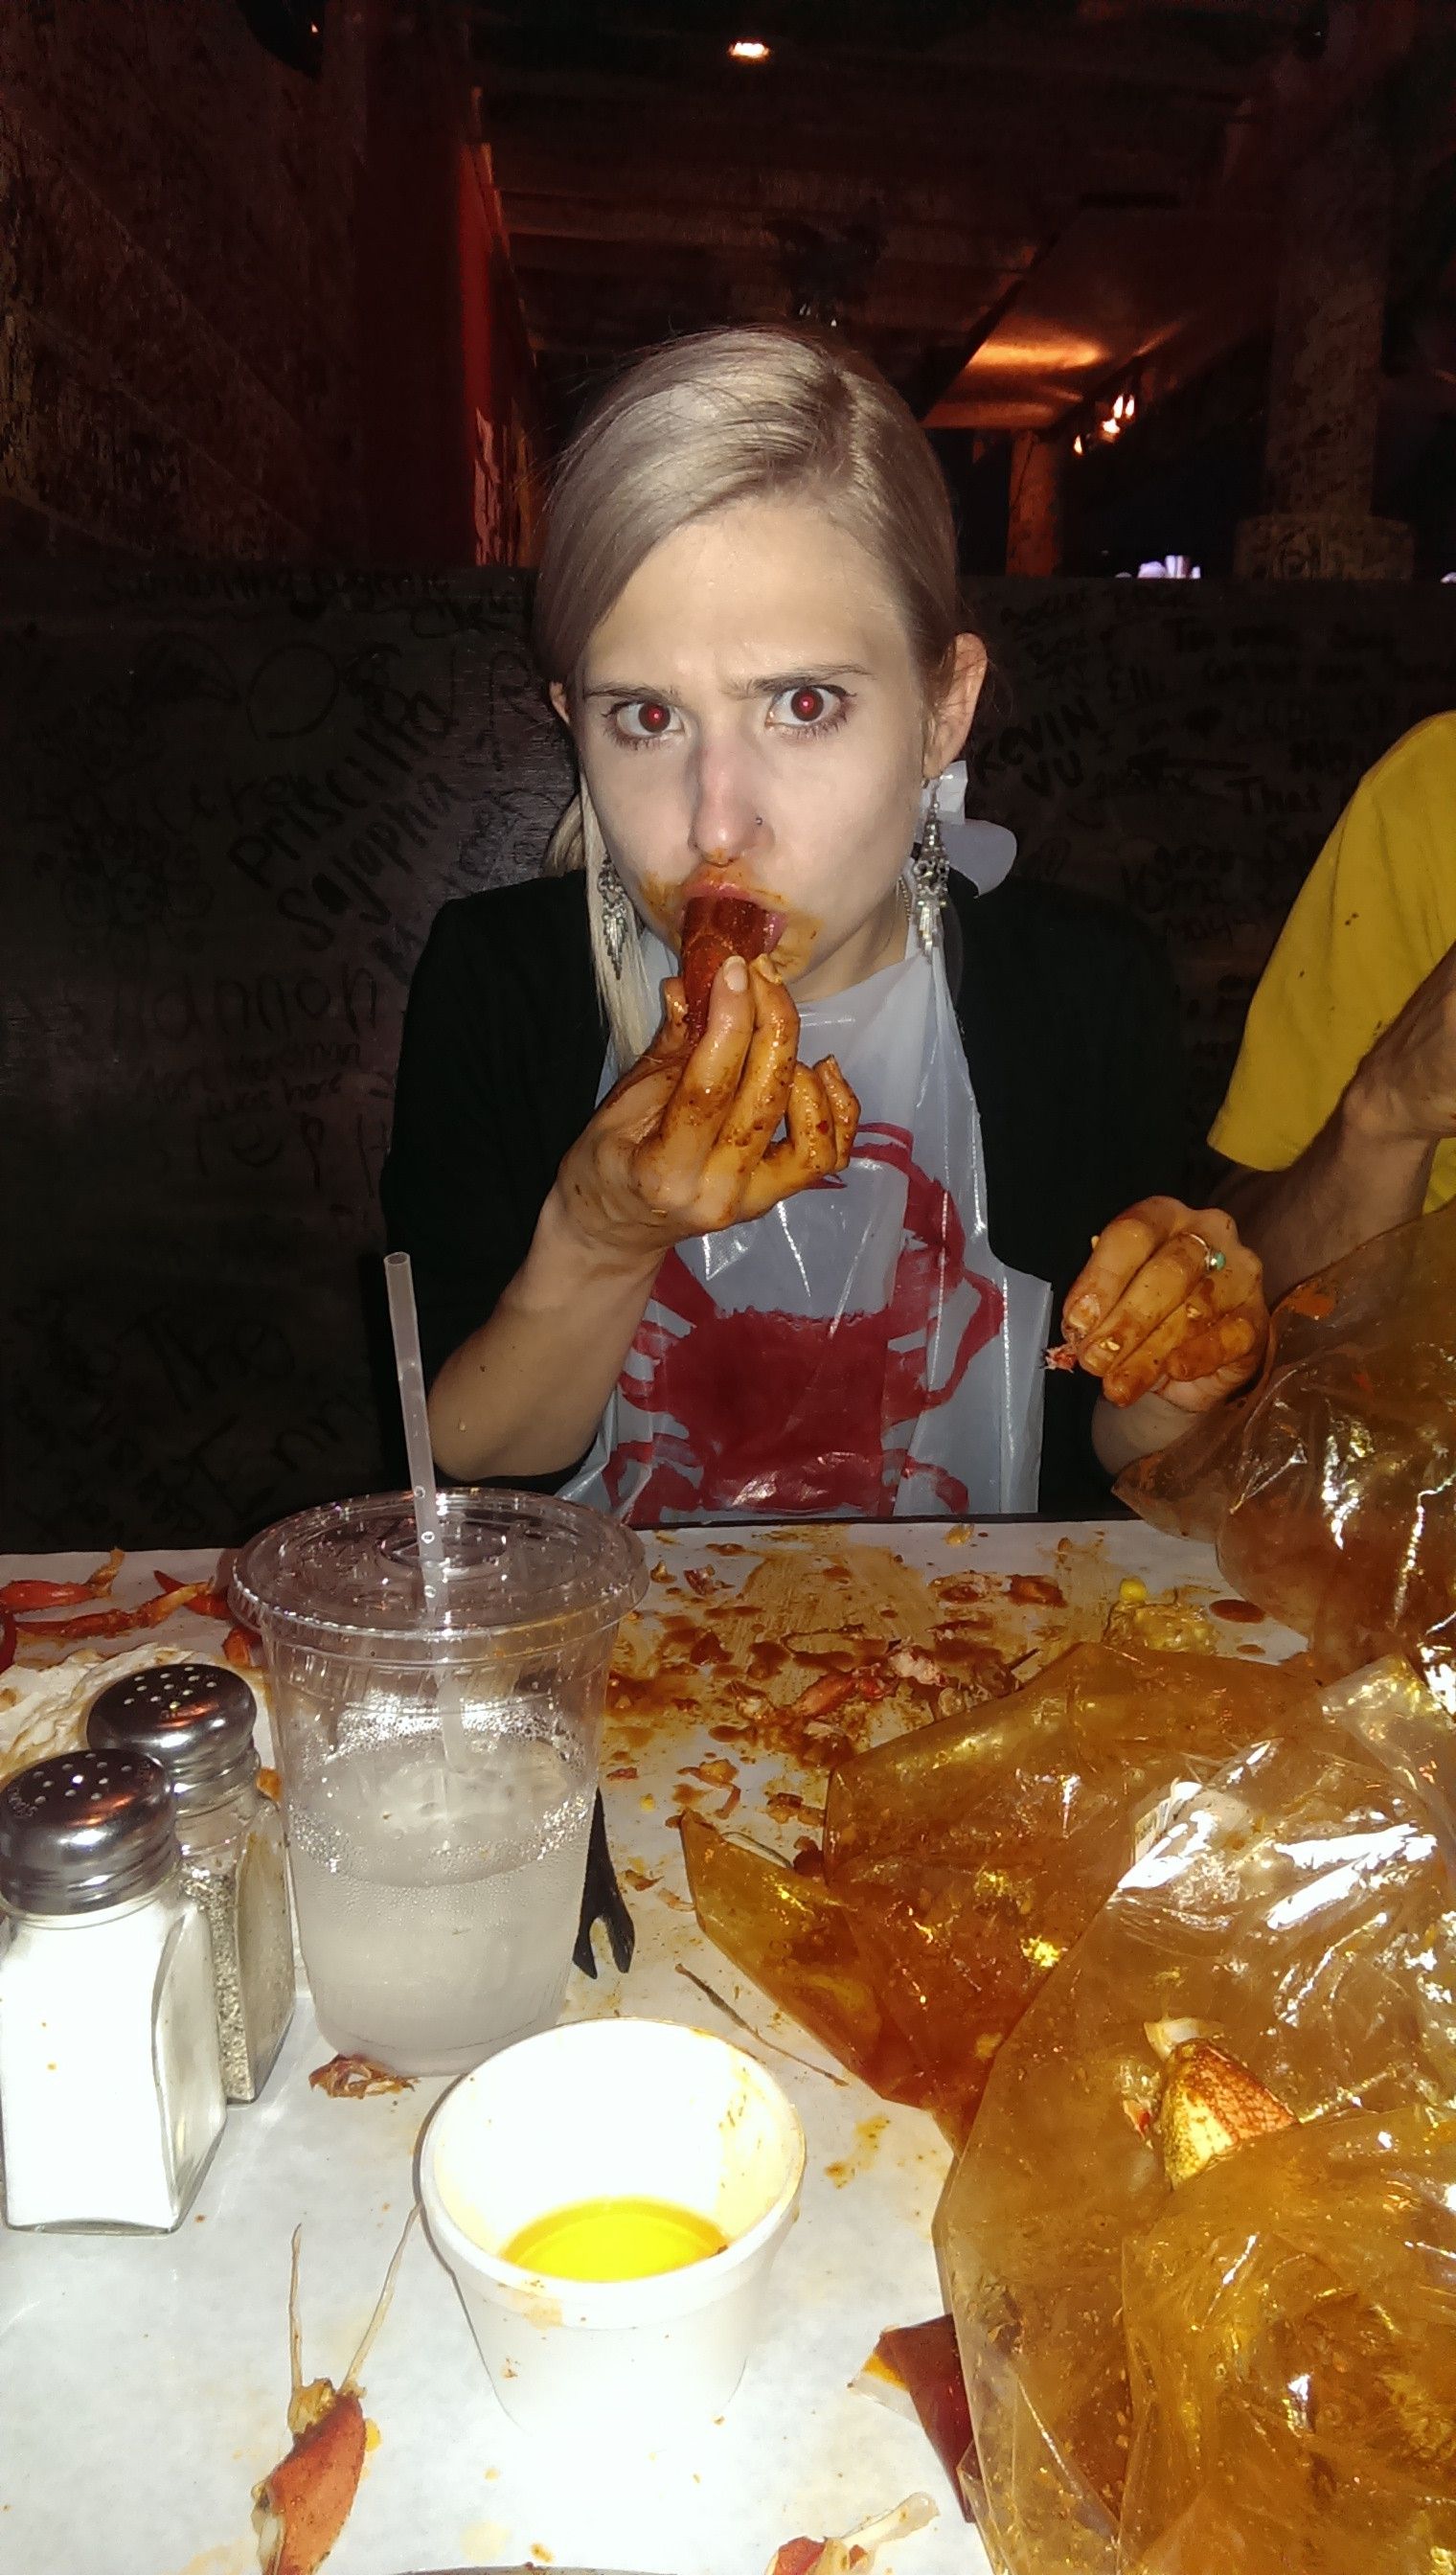 Was googling for a restaurant that serves crawfish, google has this picture as the main photo for one of the restaurants